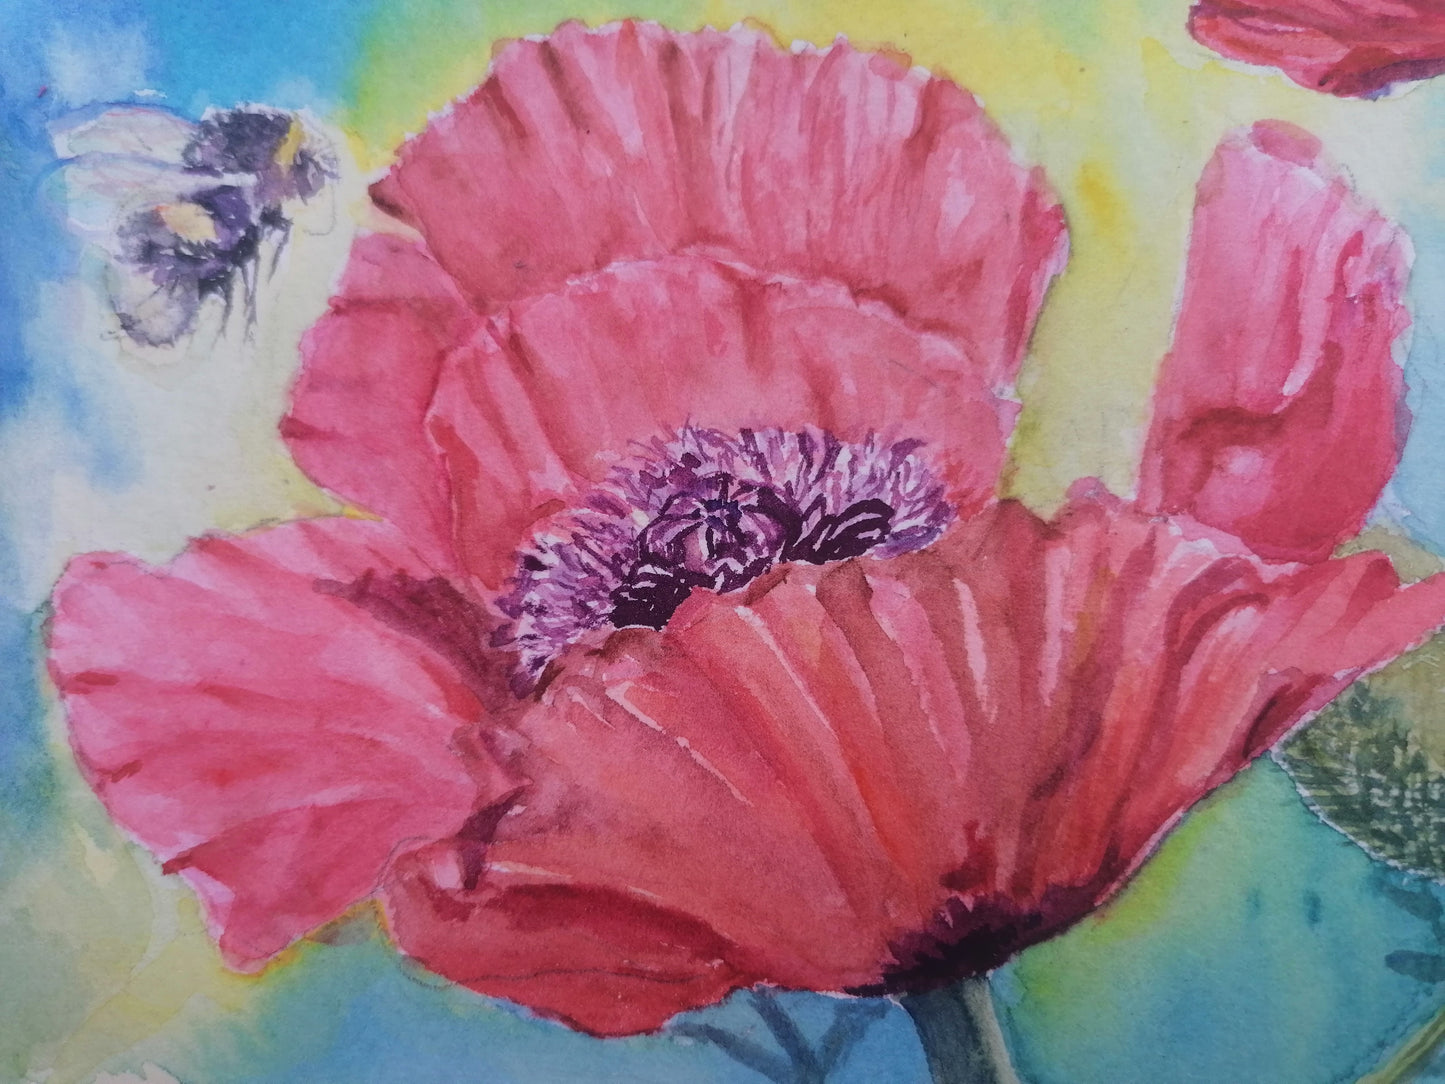 Delicious Poppies- Original Watercolour Painting